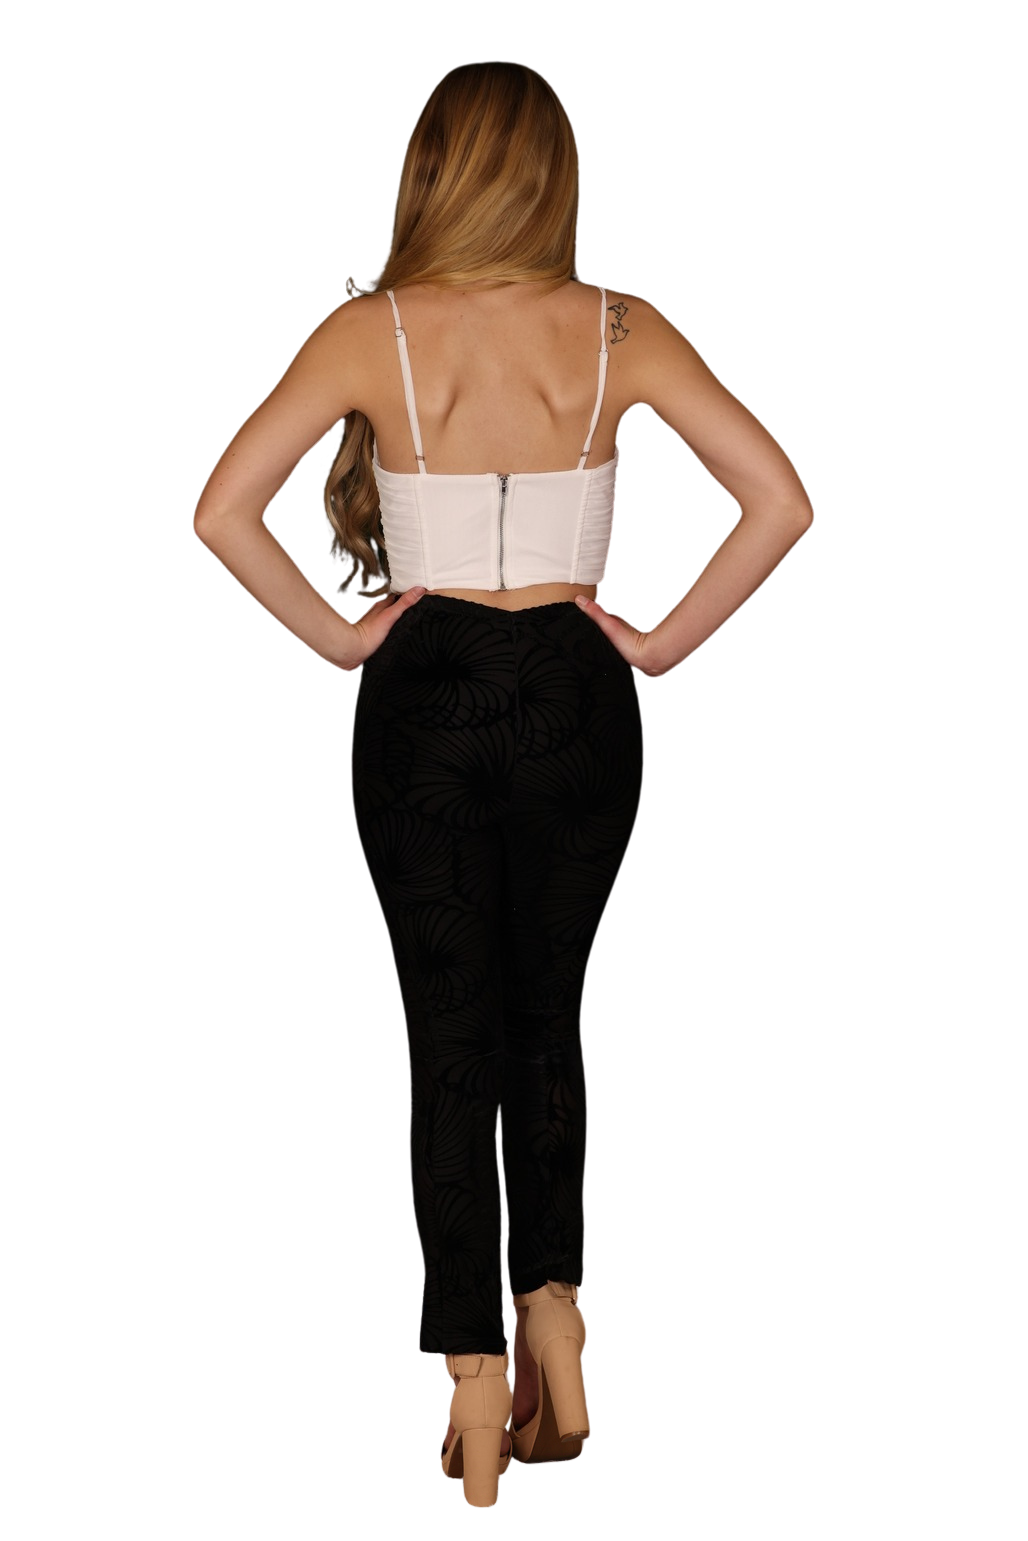 Slimming Front V-Cut and V-Back and Mesh Black Floral High Waist Skinny Curve Side Panel Pants with Cutouts